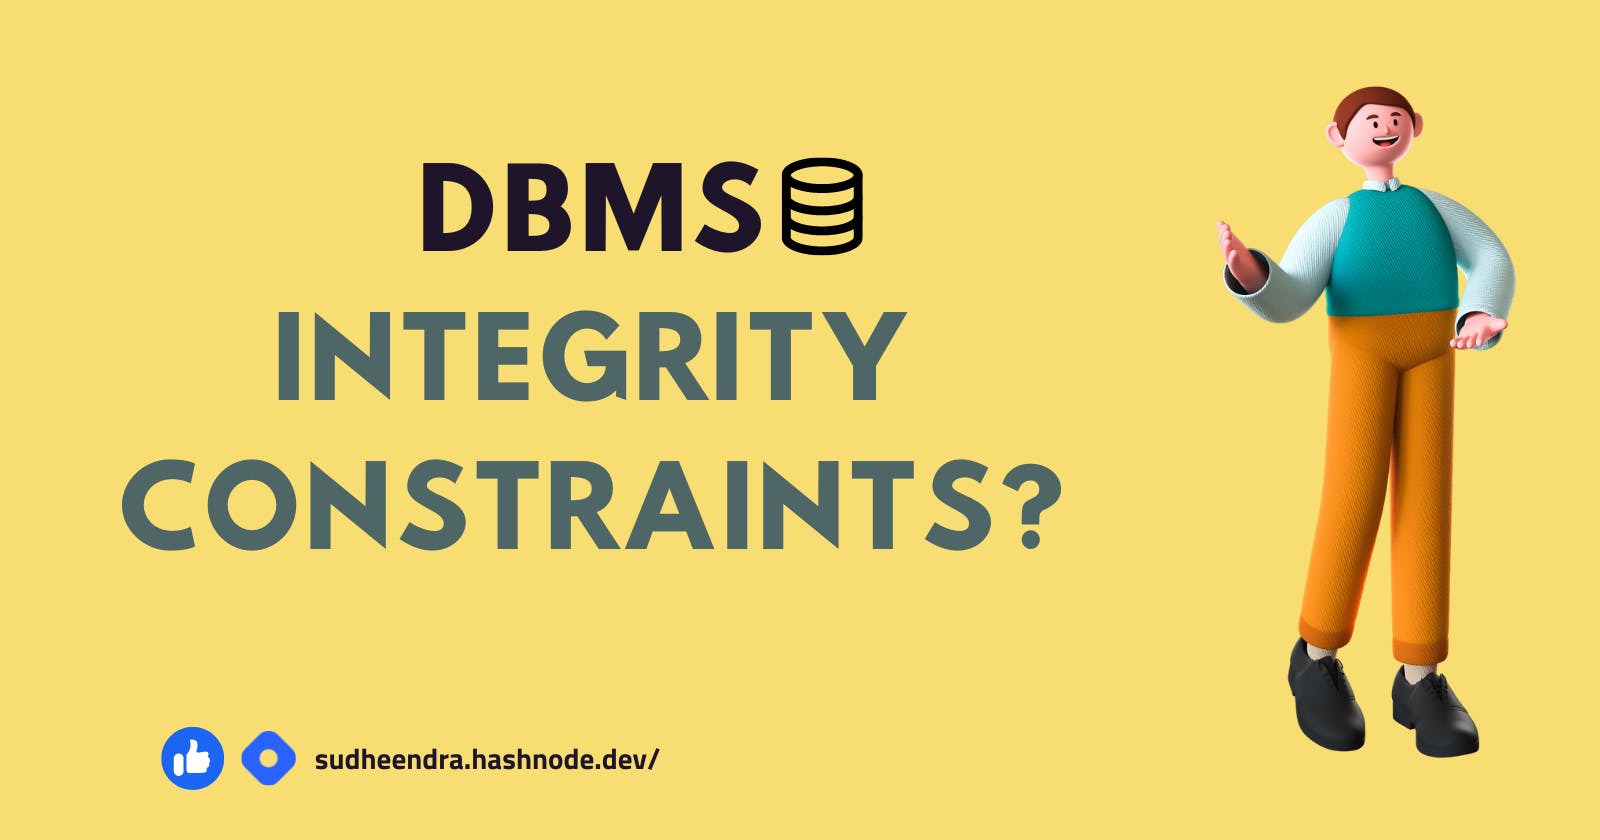 DBMS integrity constraints